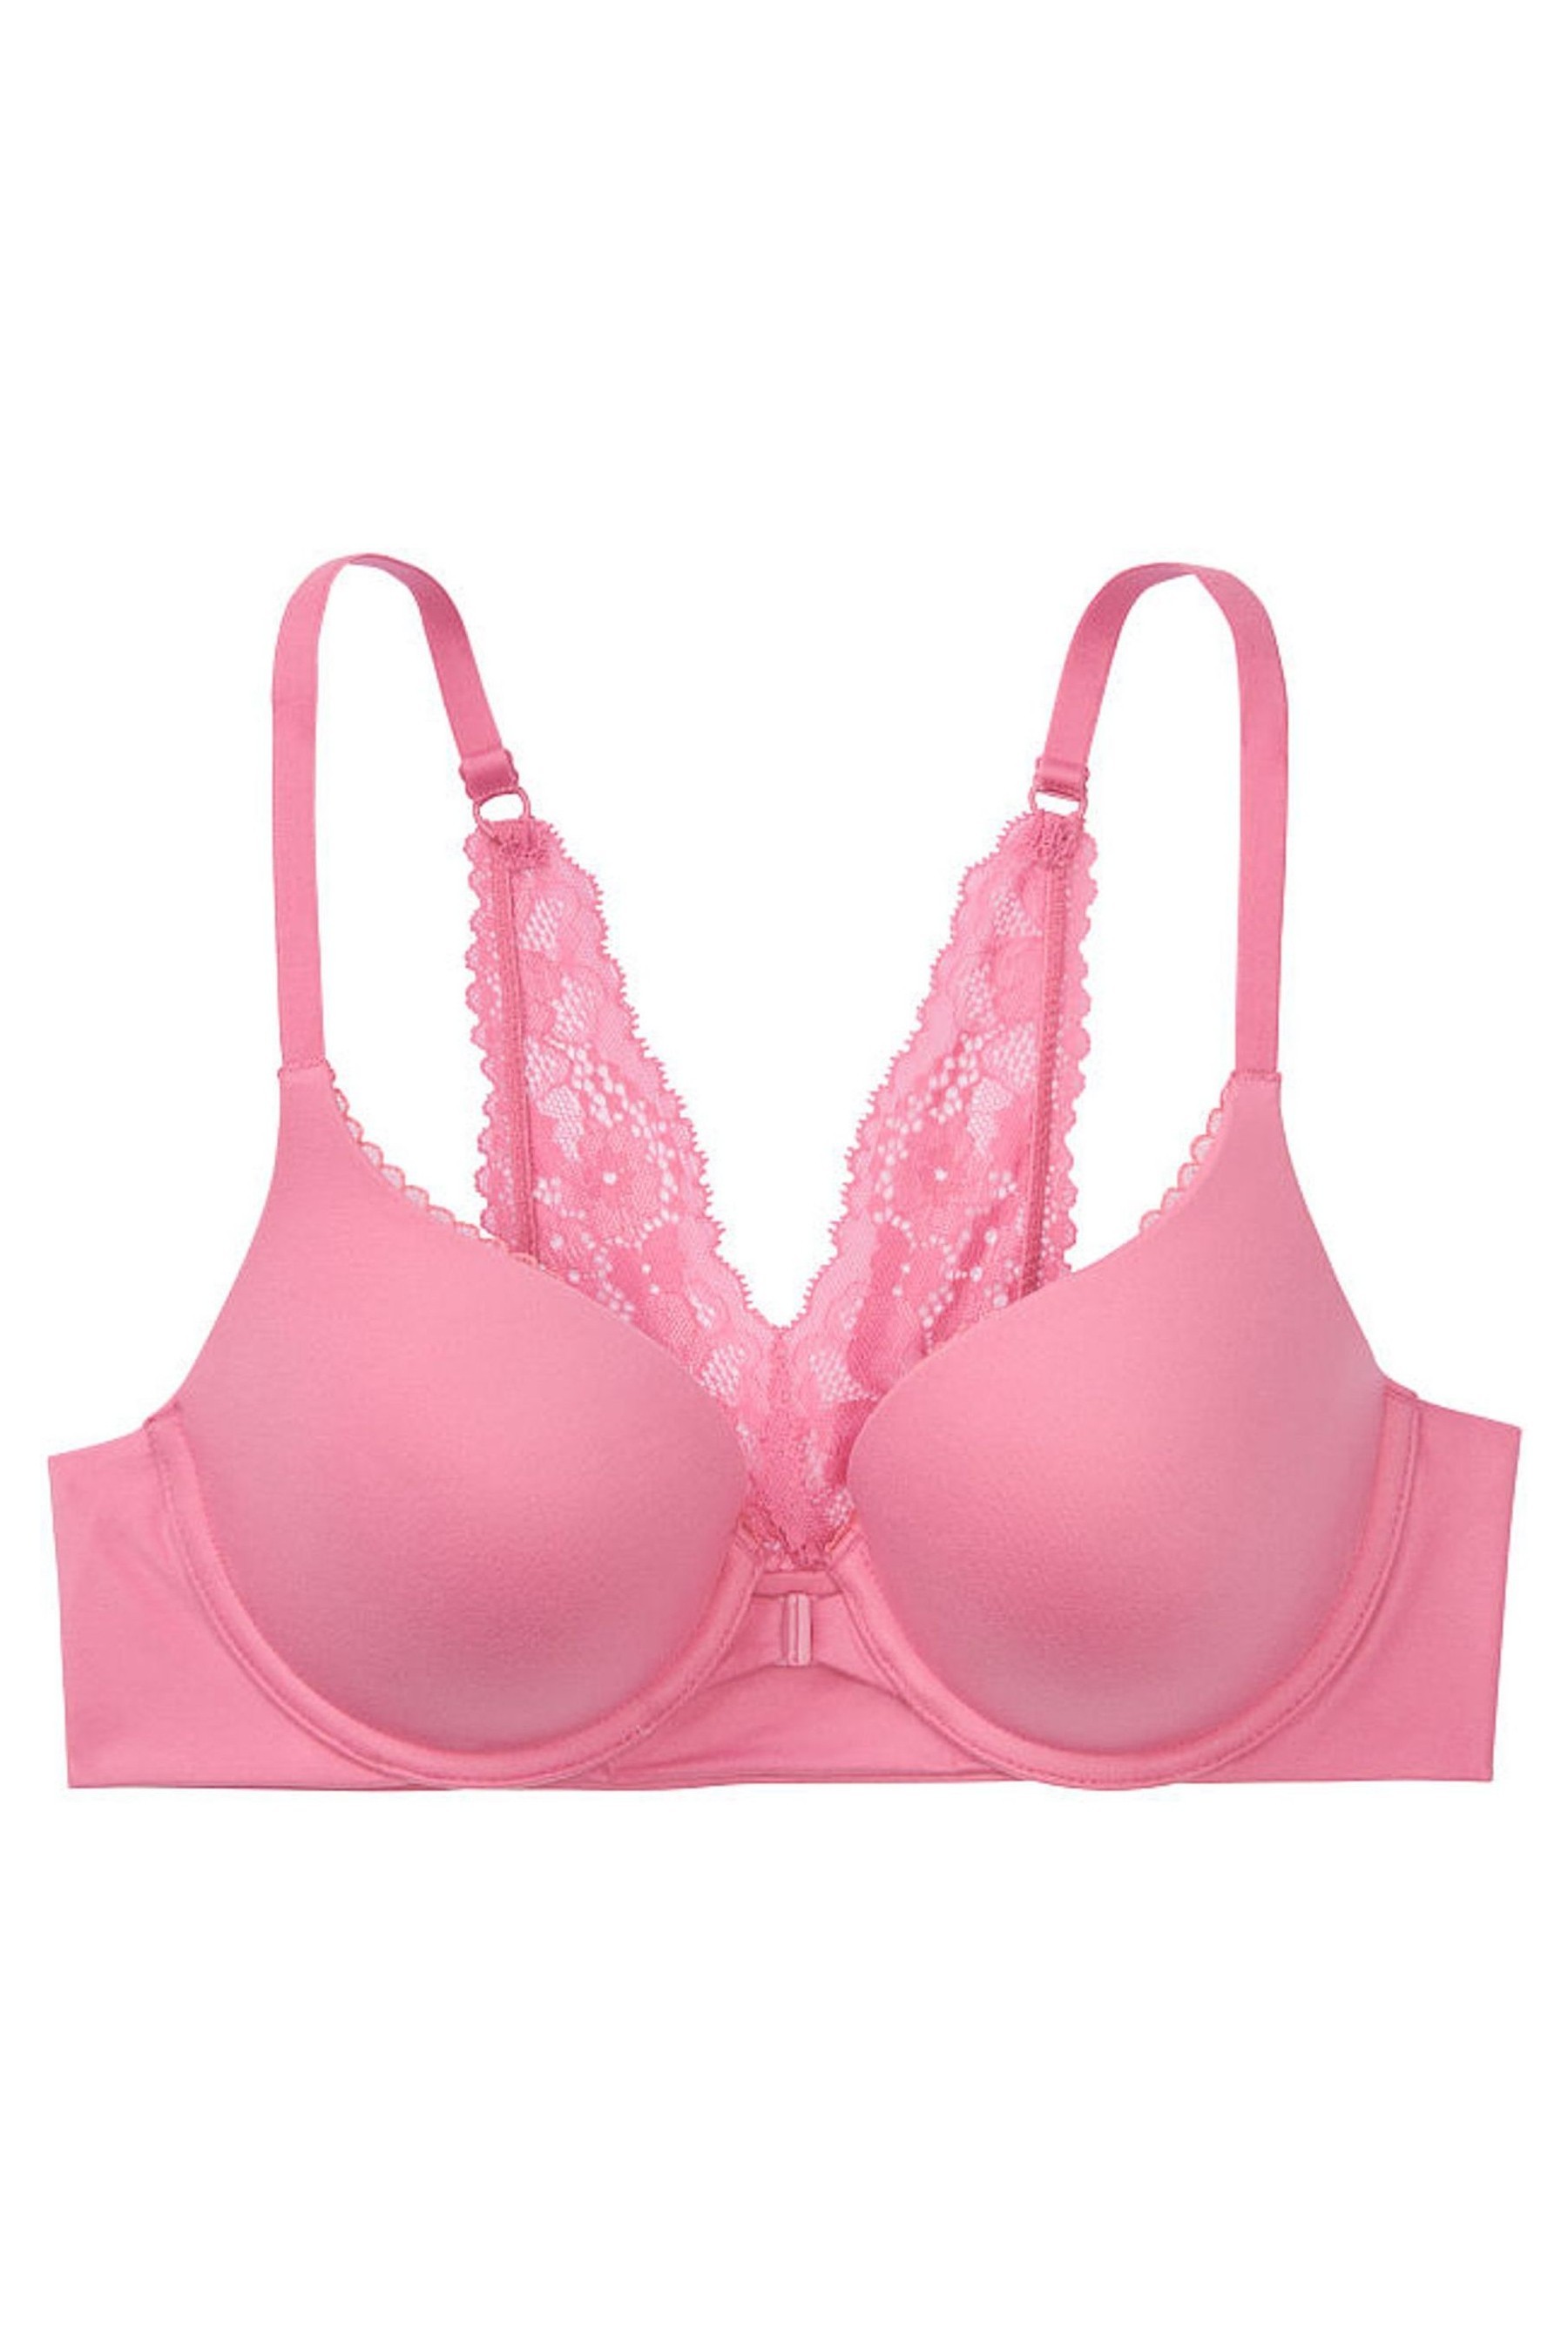 Buy Victoria's Secret Rosey Pink Smooth Full Cup Push Up Bra from the ...